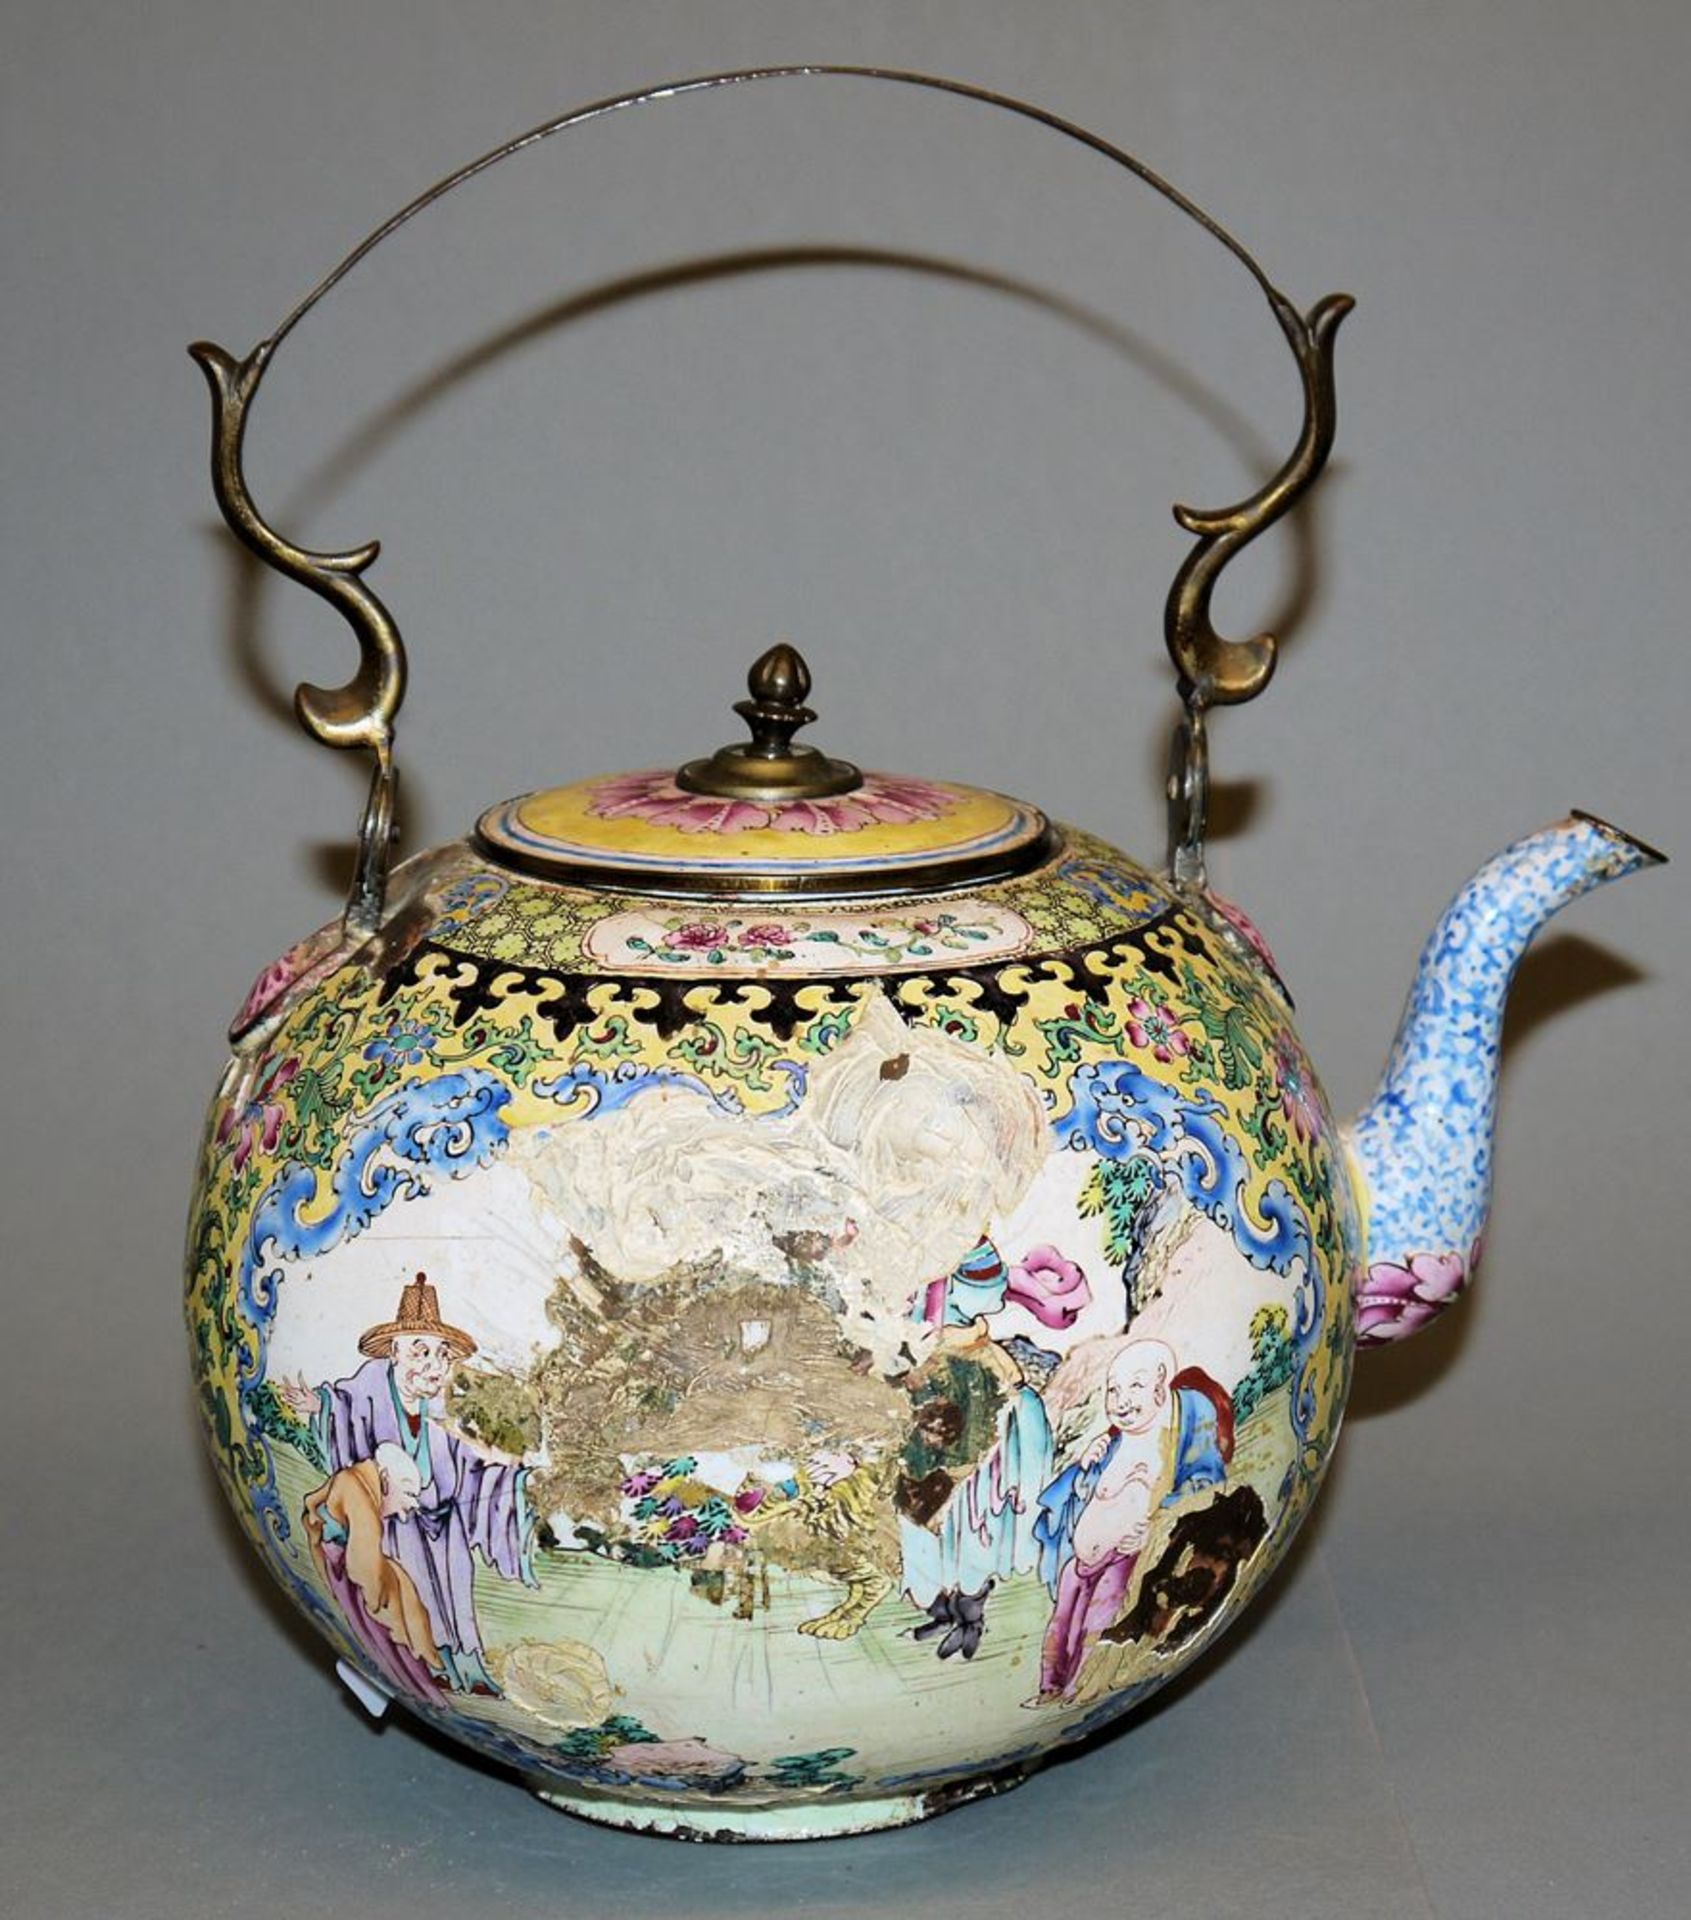 Teapot and two basins, Canton enamel with heavy traces of use, Qianlong period, China 18th century - Image 3 of 4